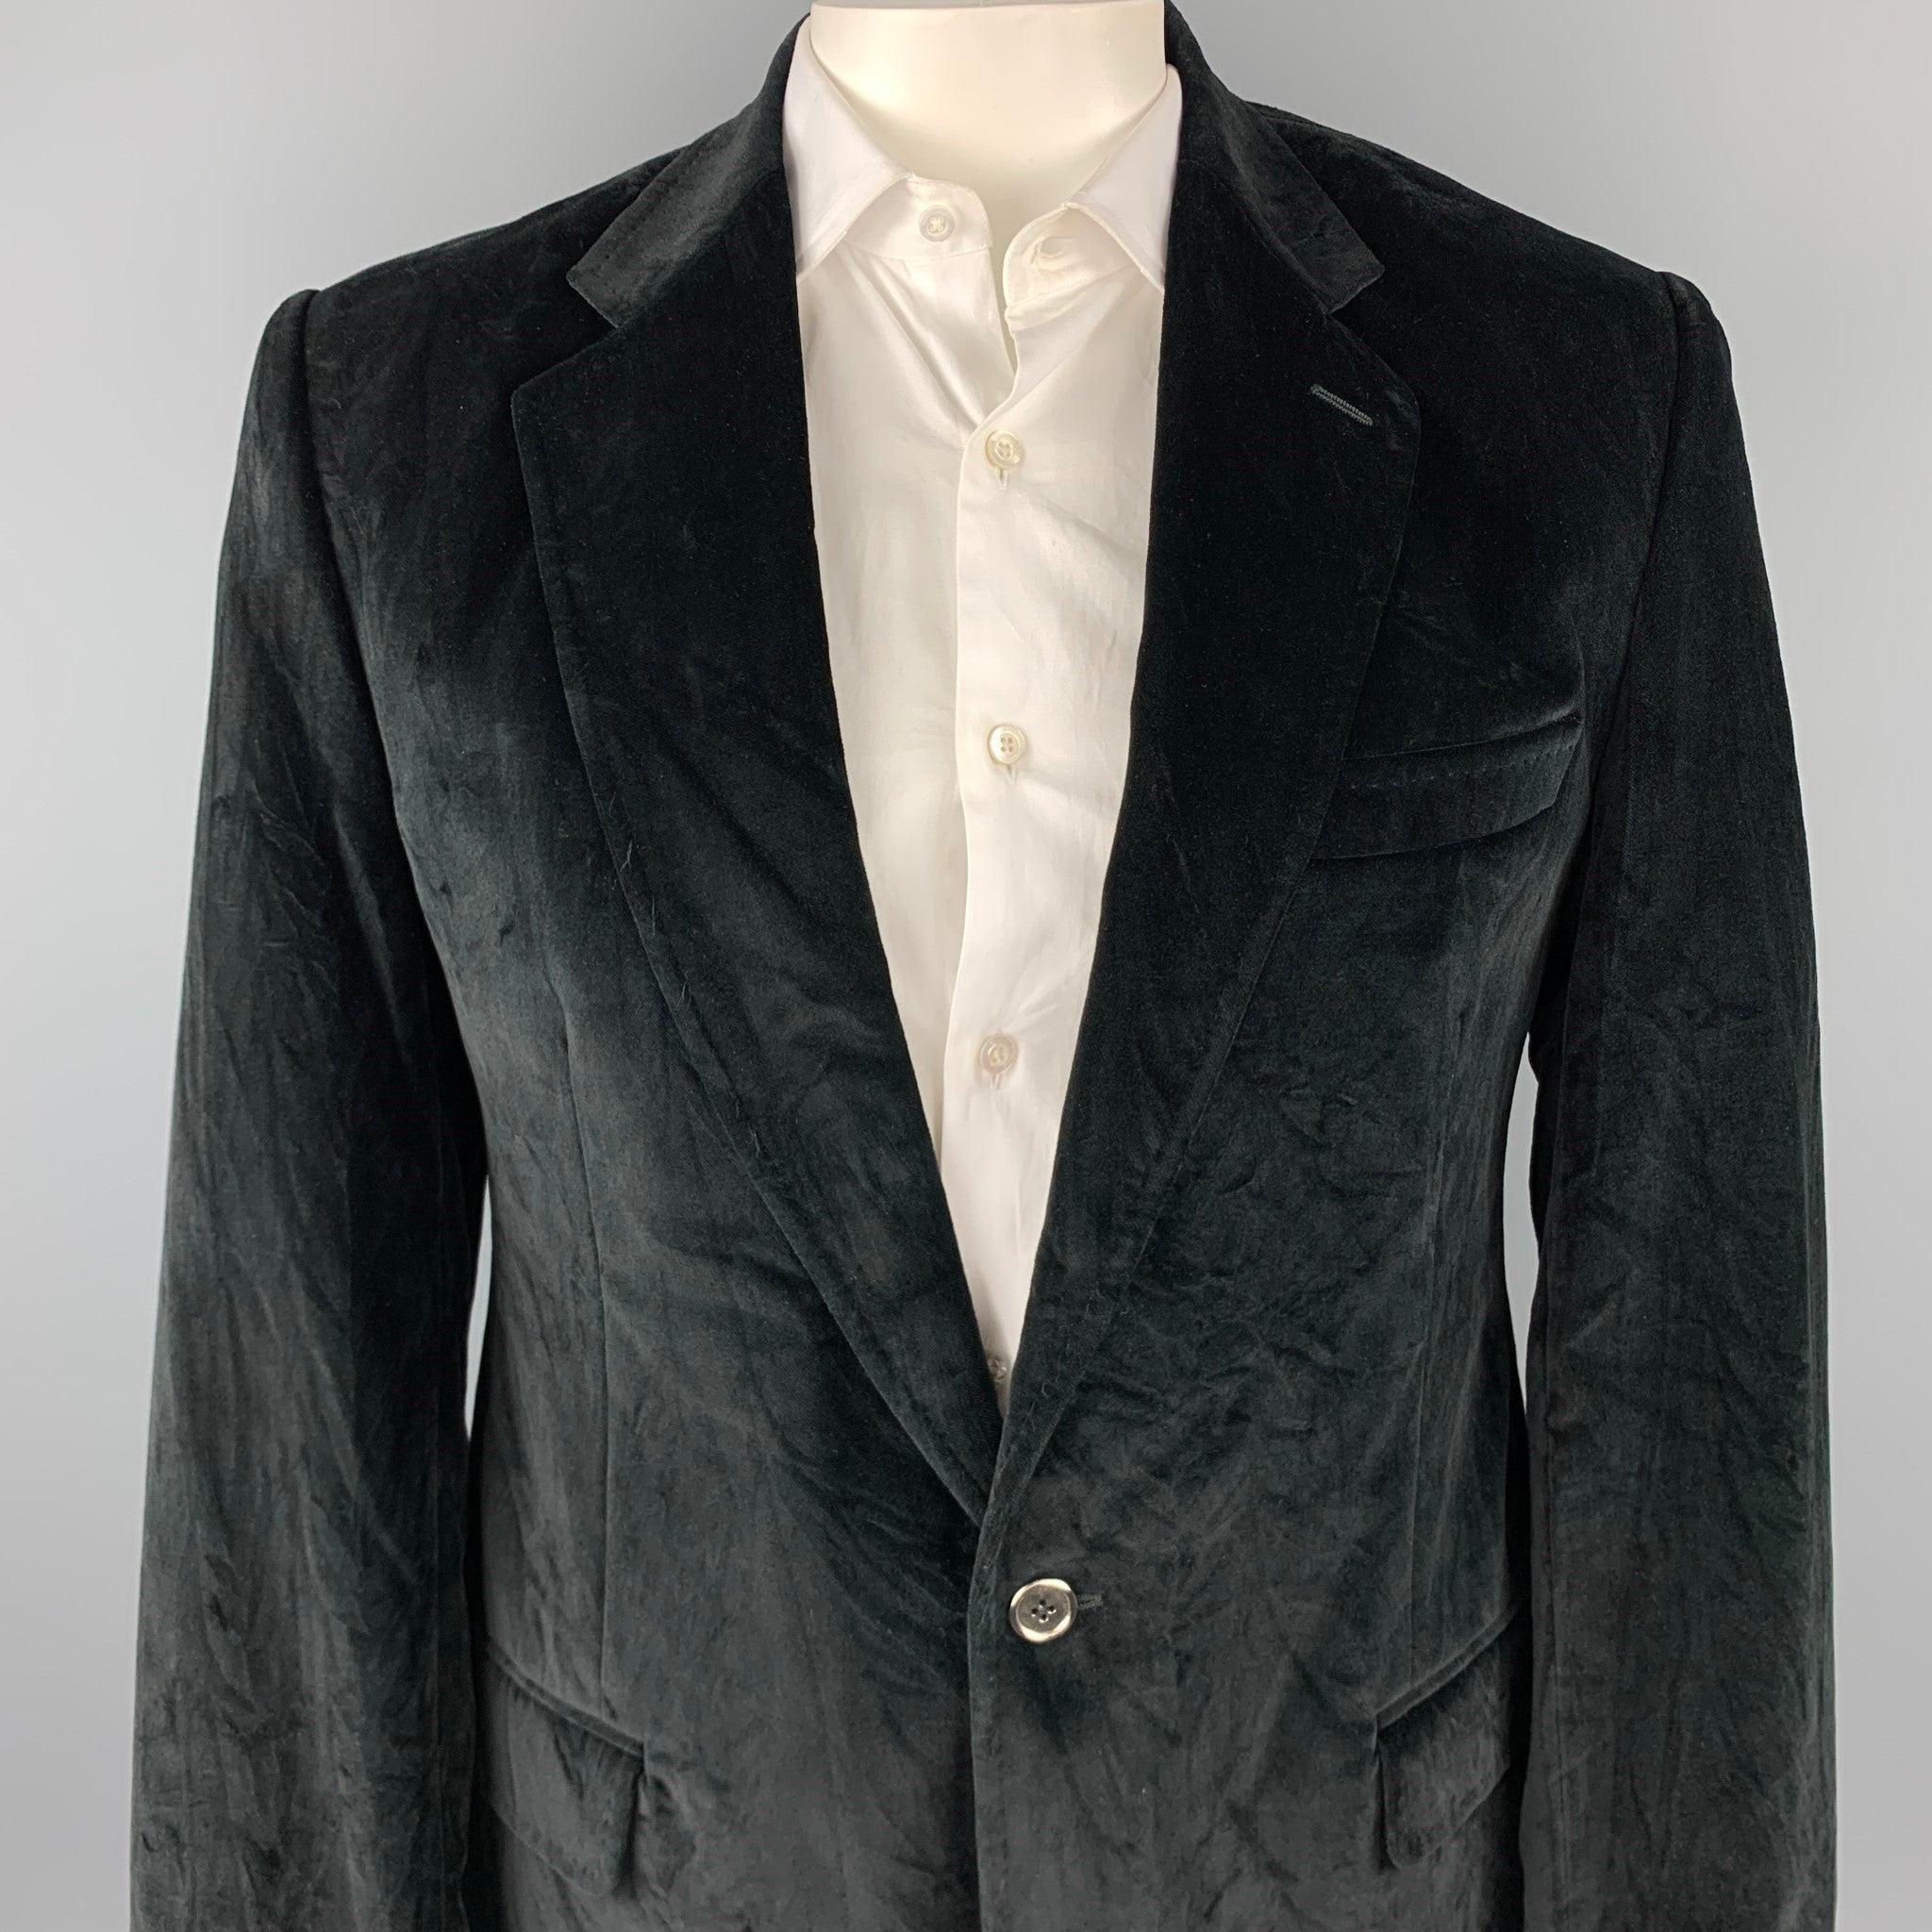 DOLCE & GABBANA sport coat comes in a black cotton velvet material with a burgundy monogram liner, featuring a notch lapel, two buttons at closure, slit and flap pockets, single breasted, buttoned cuffs, and a double vent at back. Jacket liner has